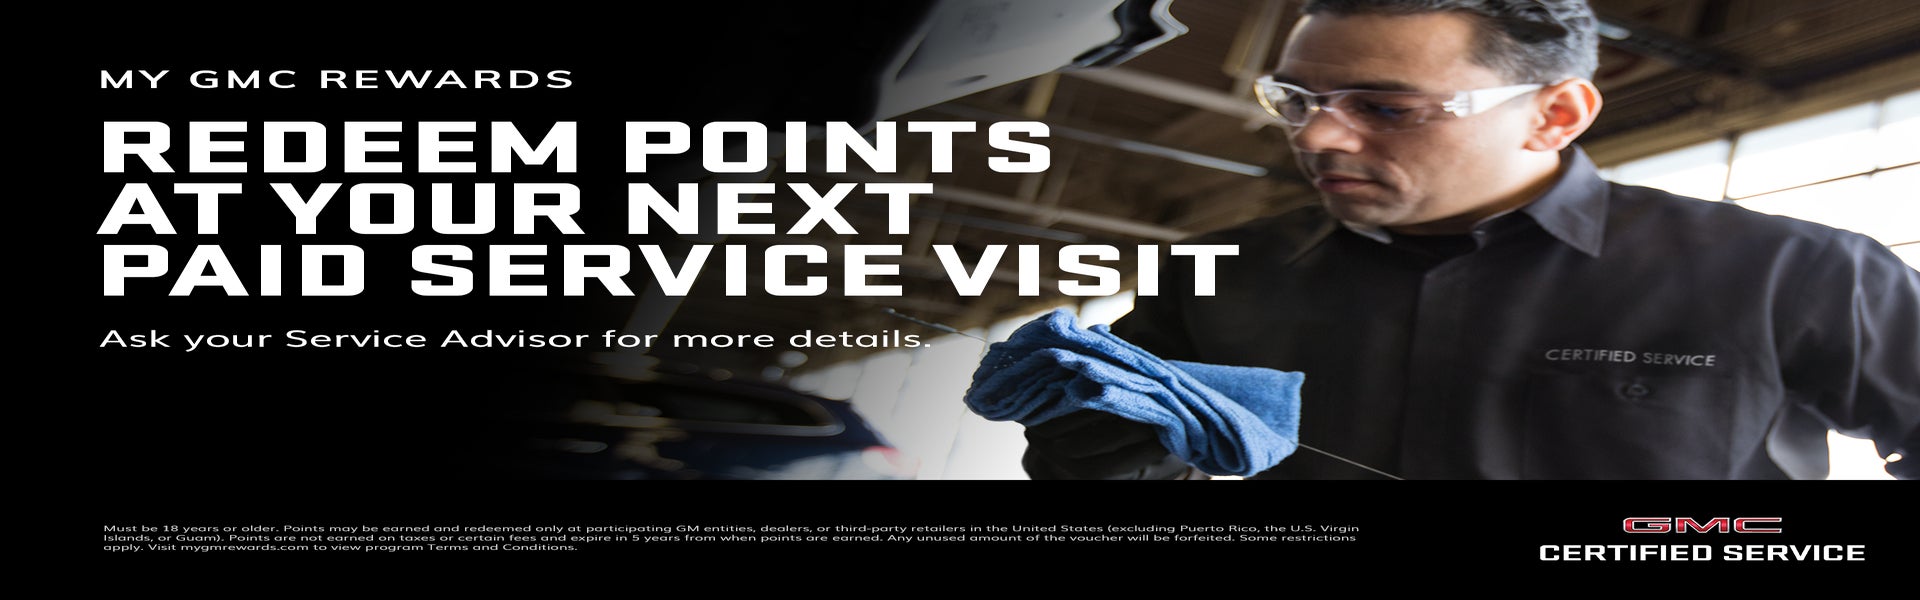 Redeem Points at Your Next Paid Service Visit